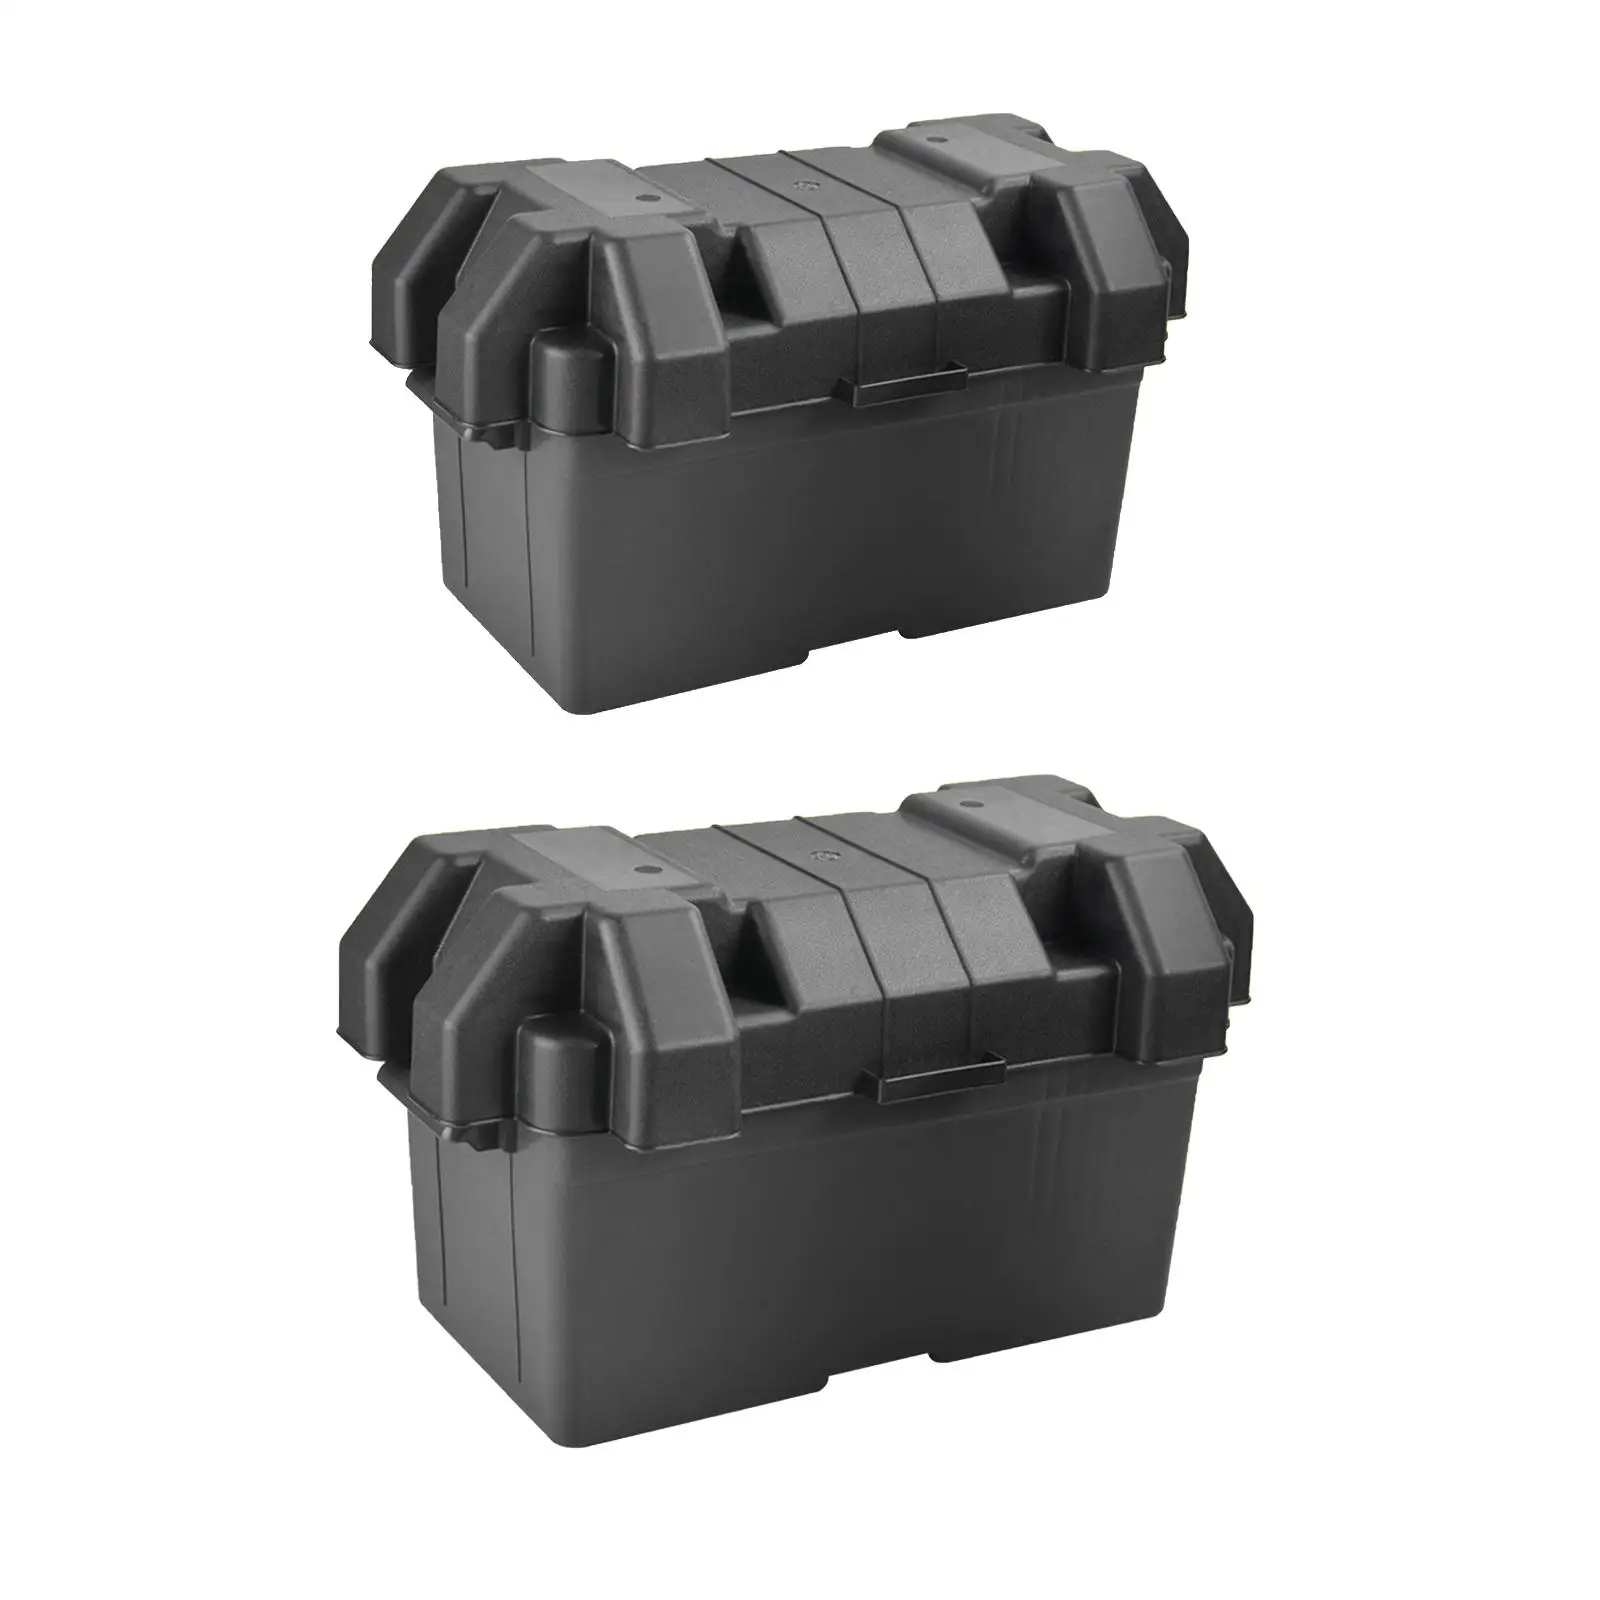 Battery Storage Box with Strap Anti Corrosion Heavy Duty Black Waterproof Battery Tray Cases for ATV Boat Truck Camper Car